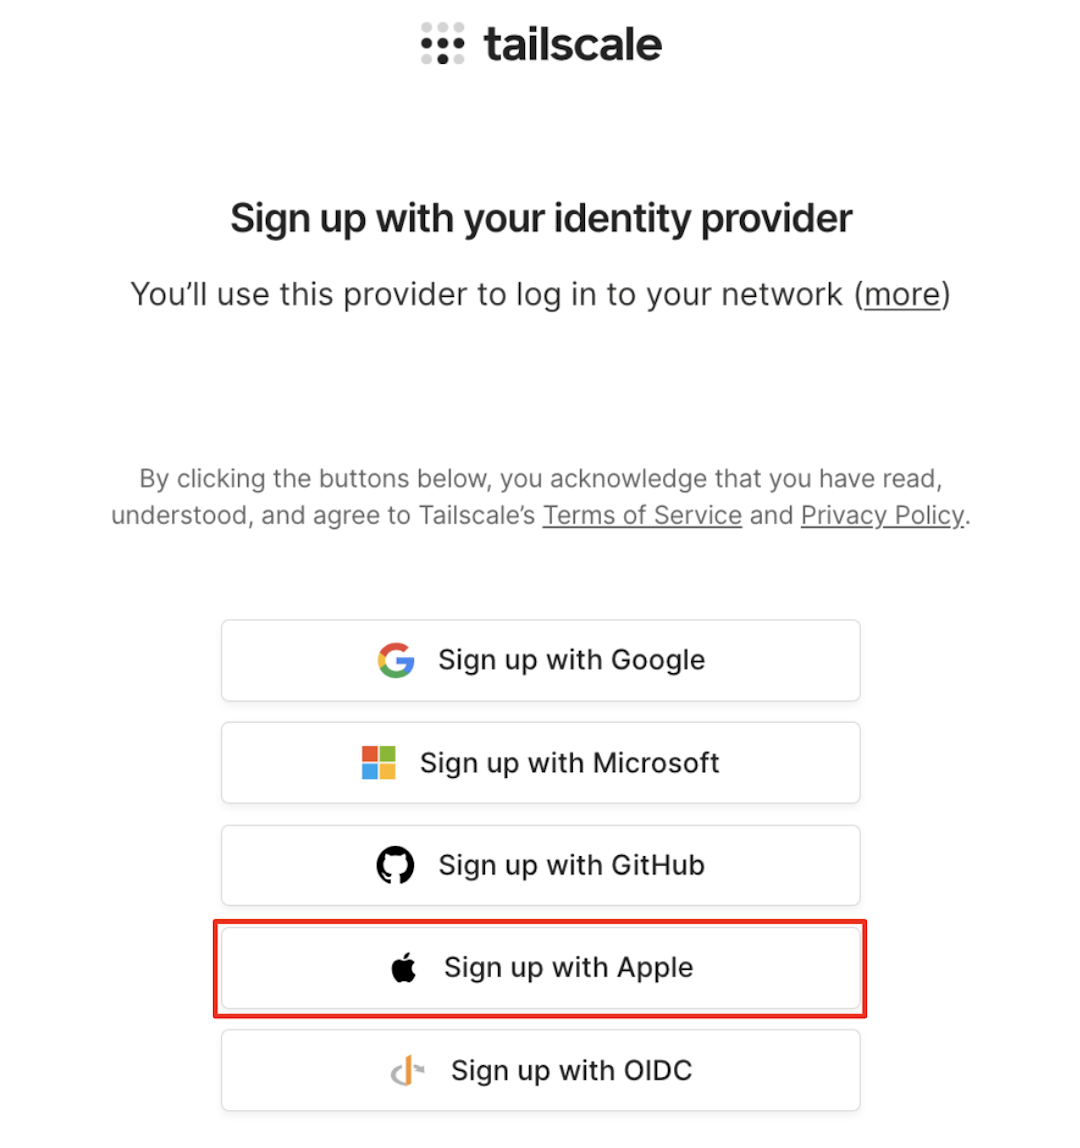 Select Apple when signing up to Tailscale